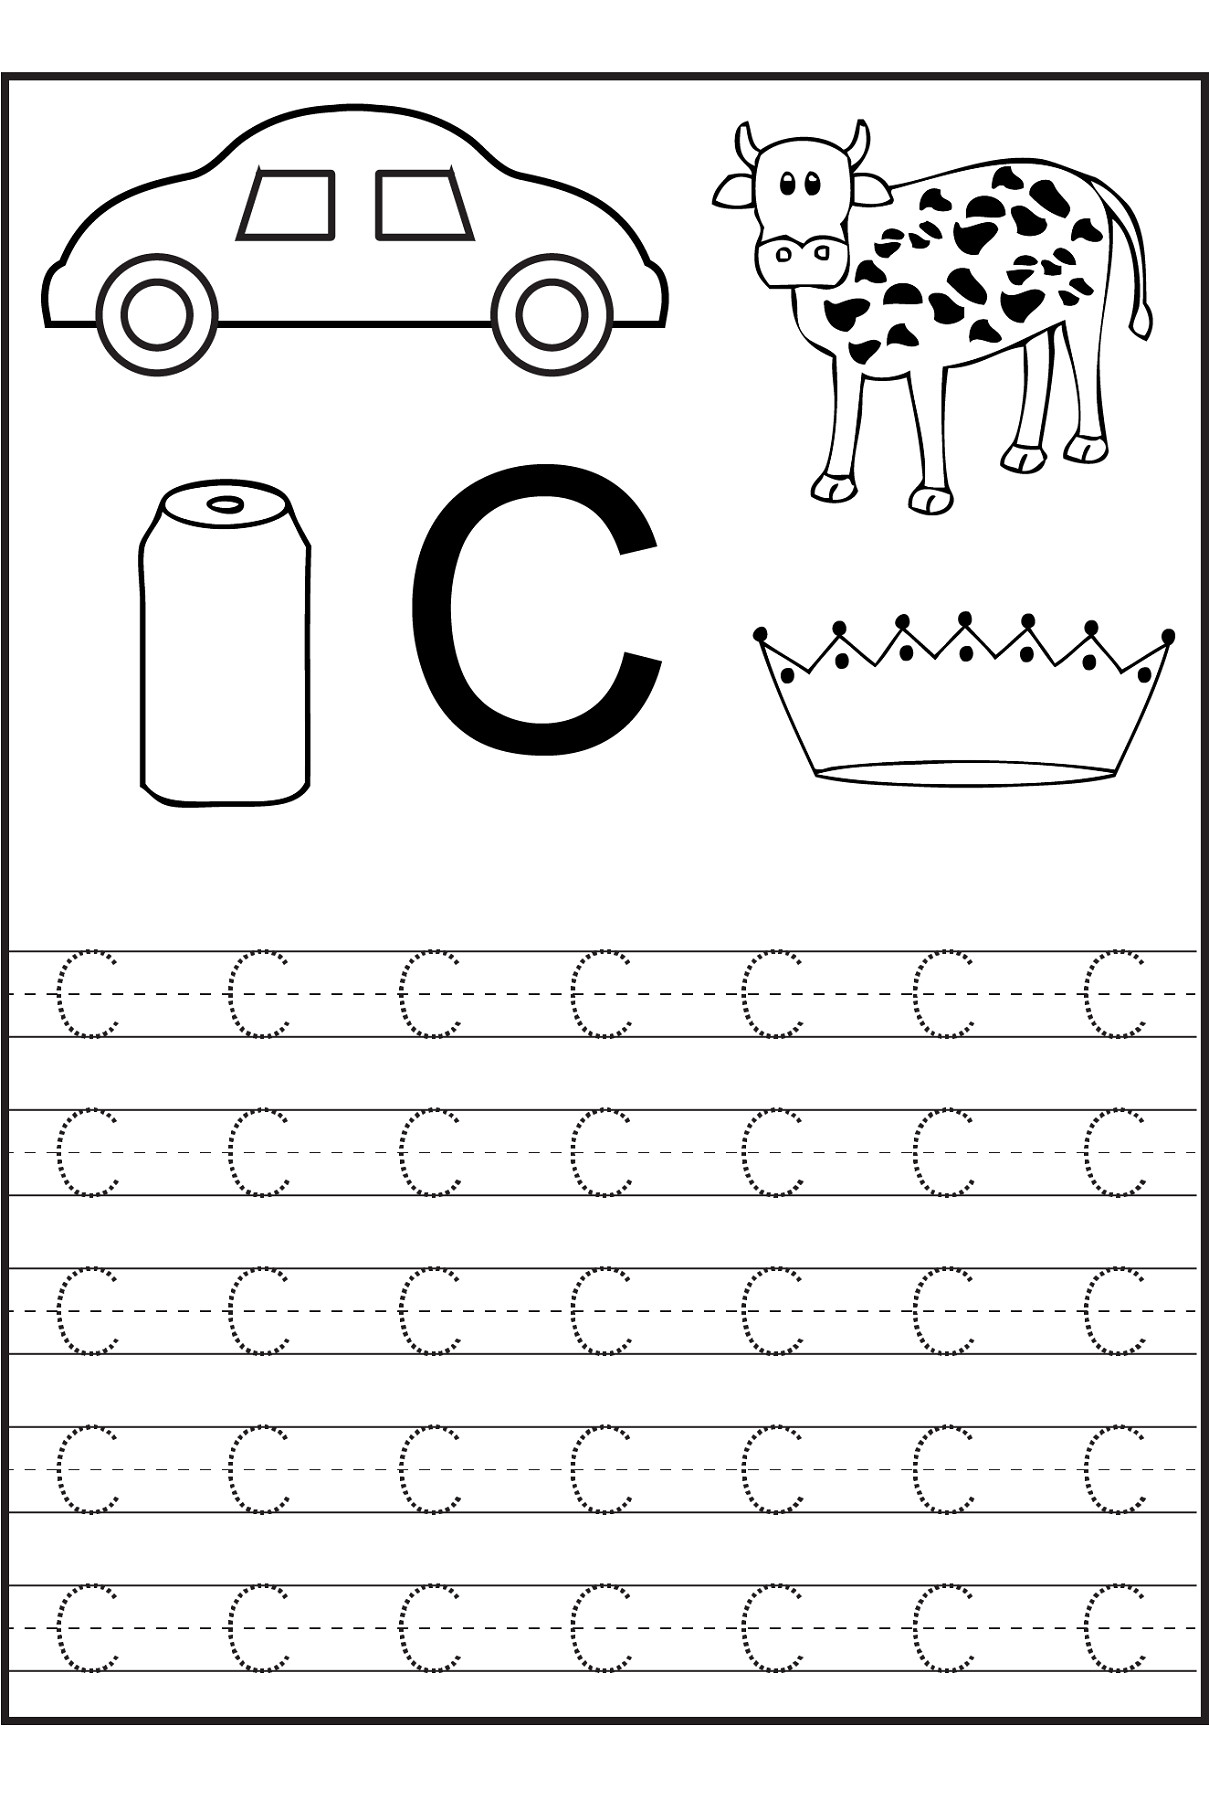 Letter C Coloring Pages For Preschoolers Startearlyrun Part 66